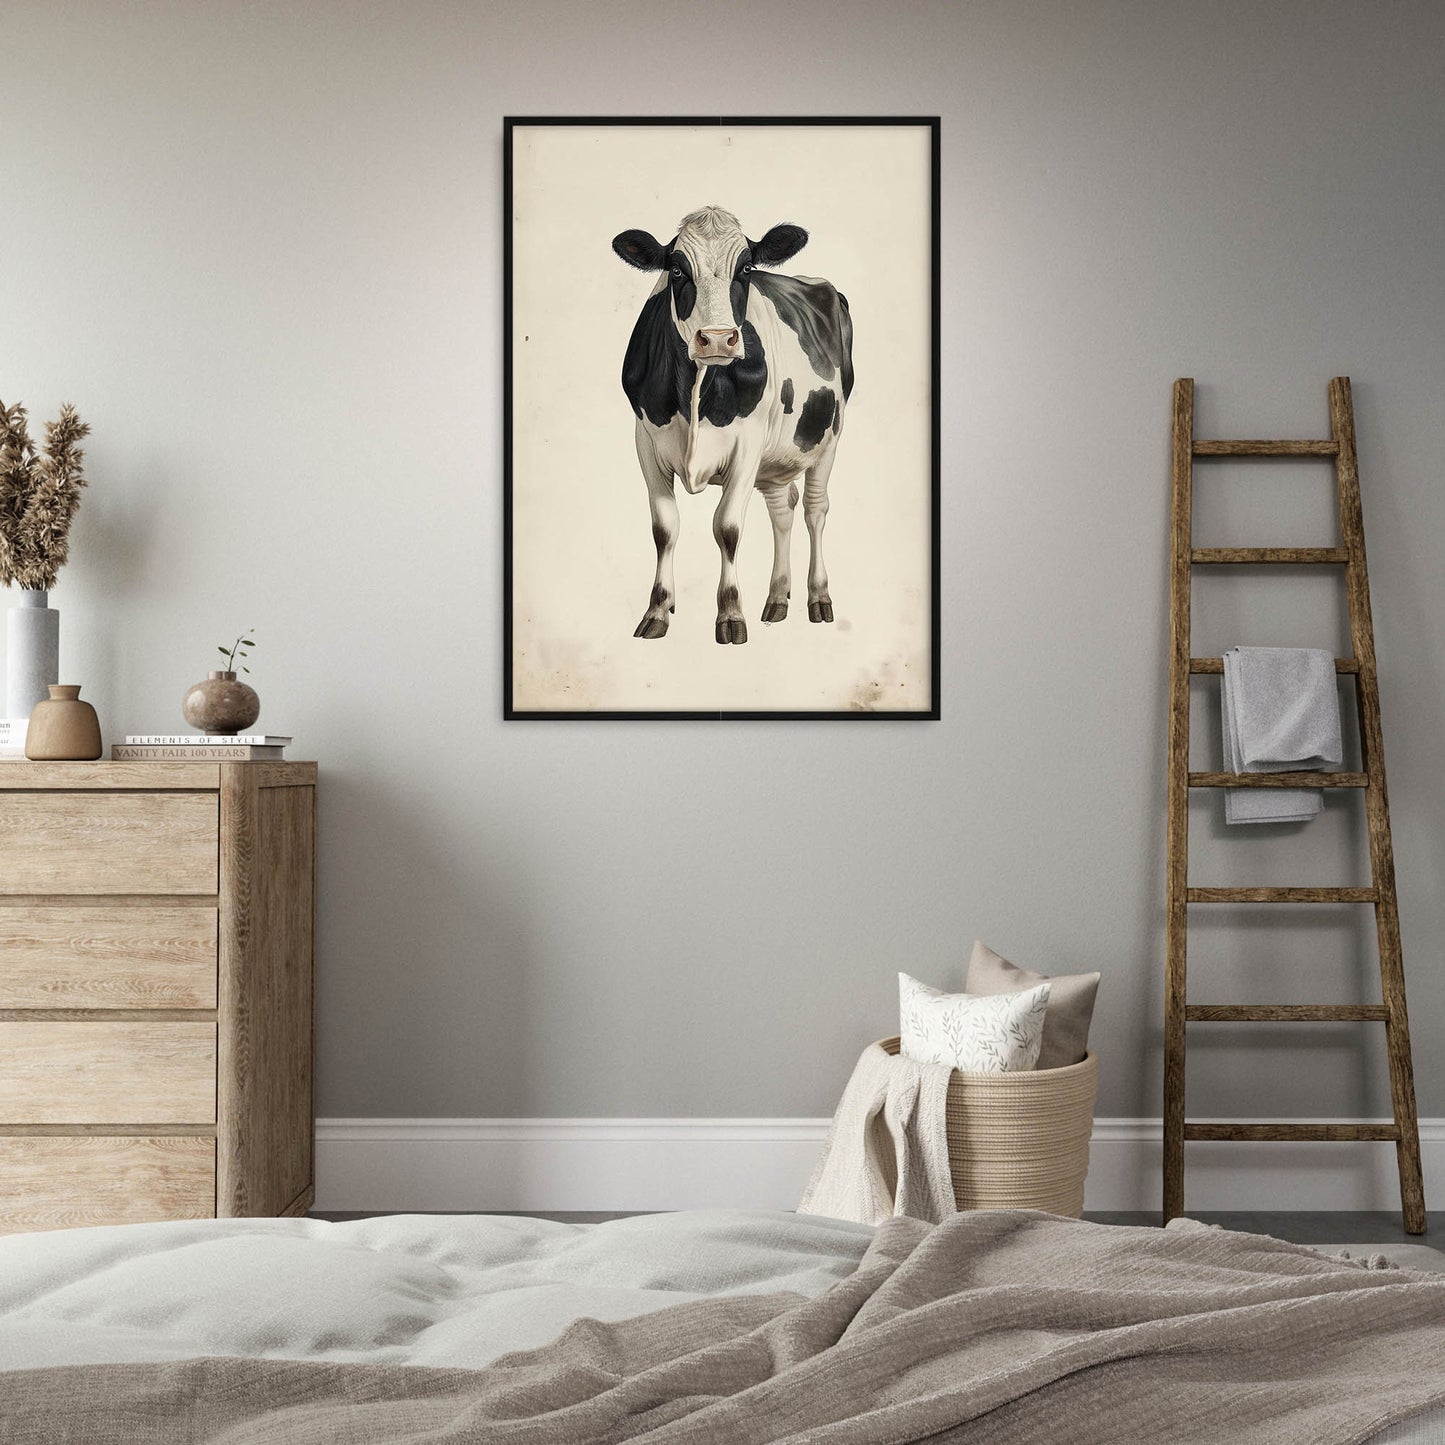 »Cow« zoologisk vintageposter